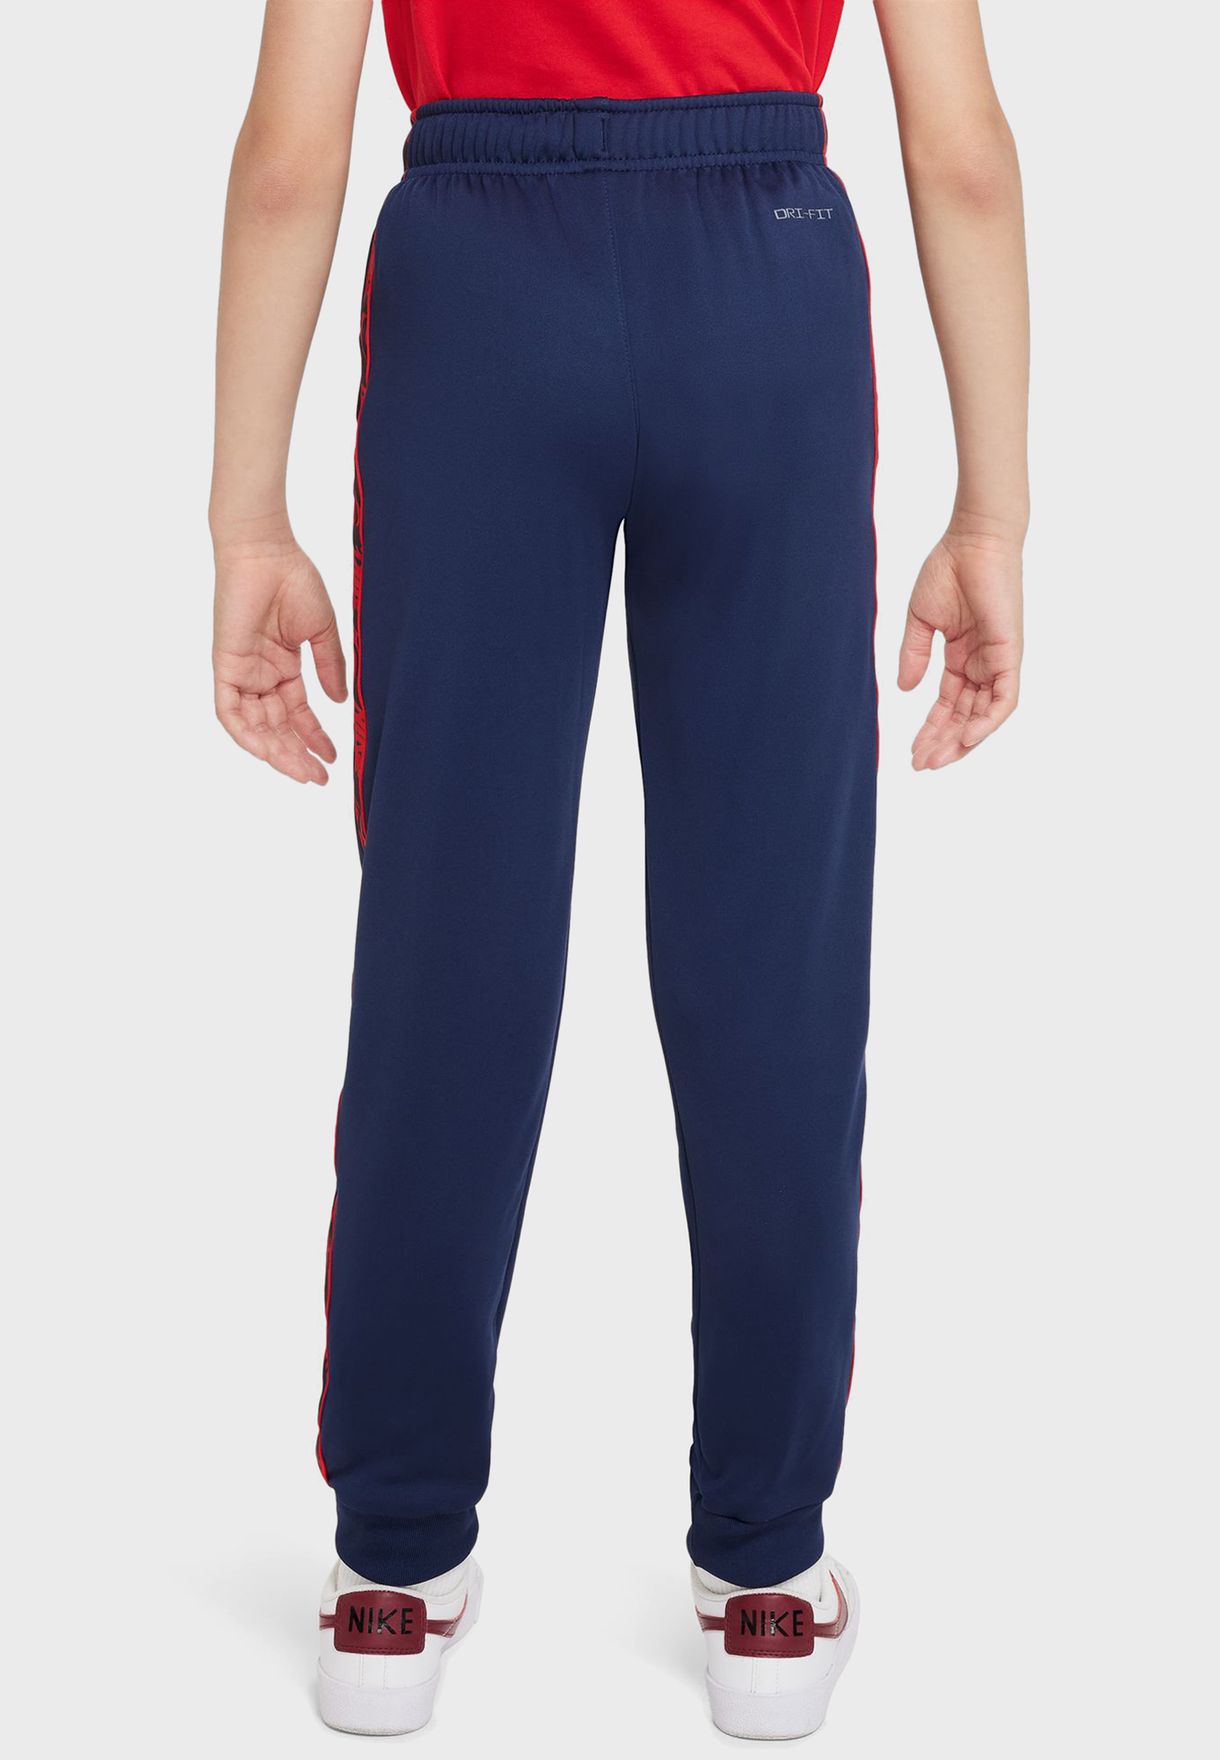 Youth Nsw Repeat Sweatpants